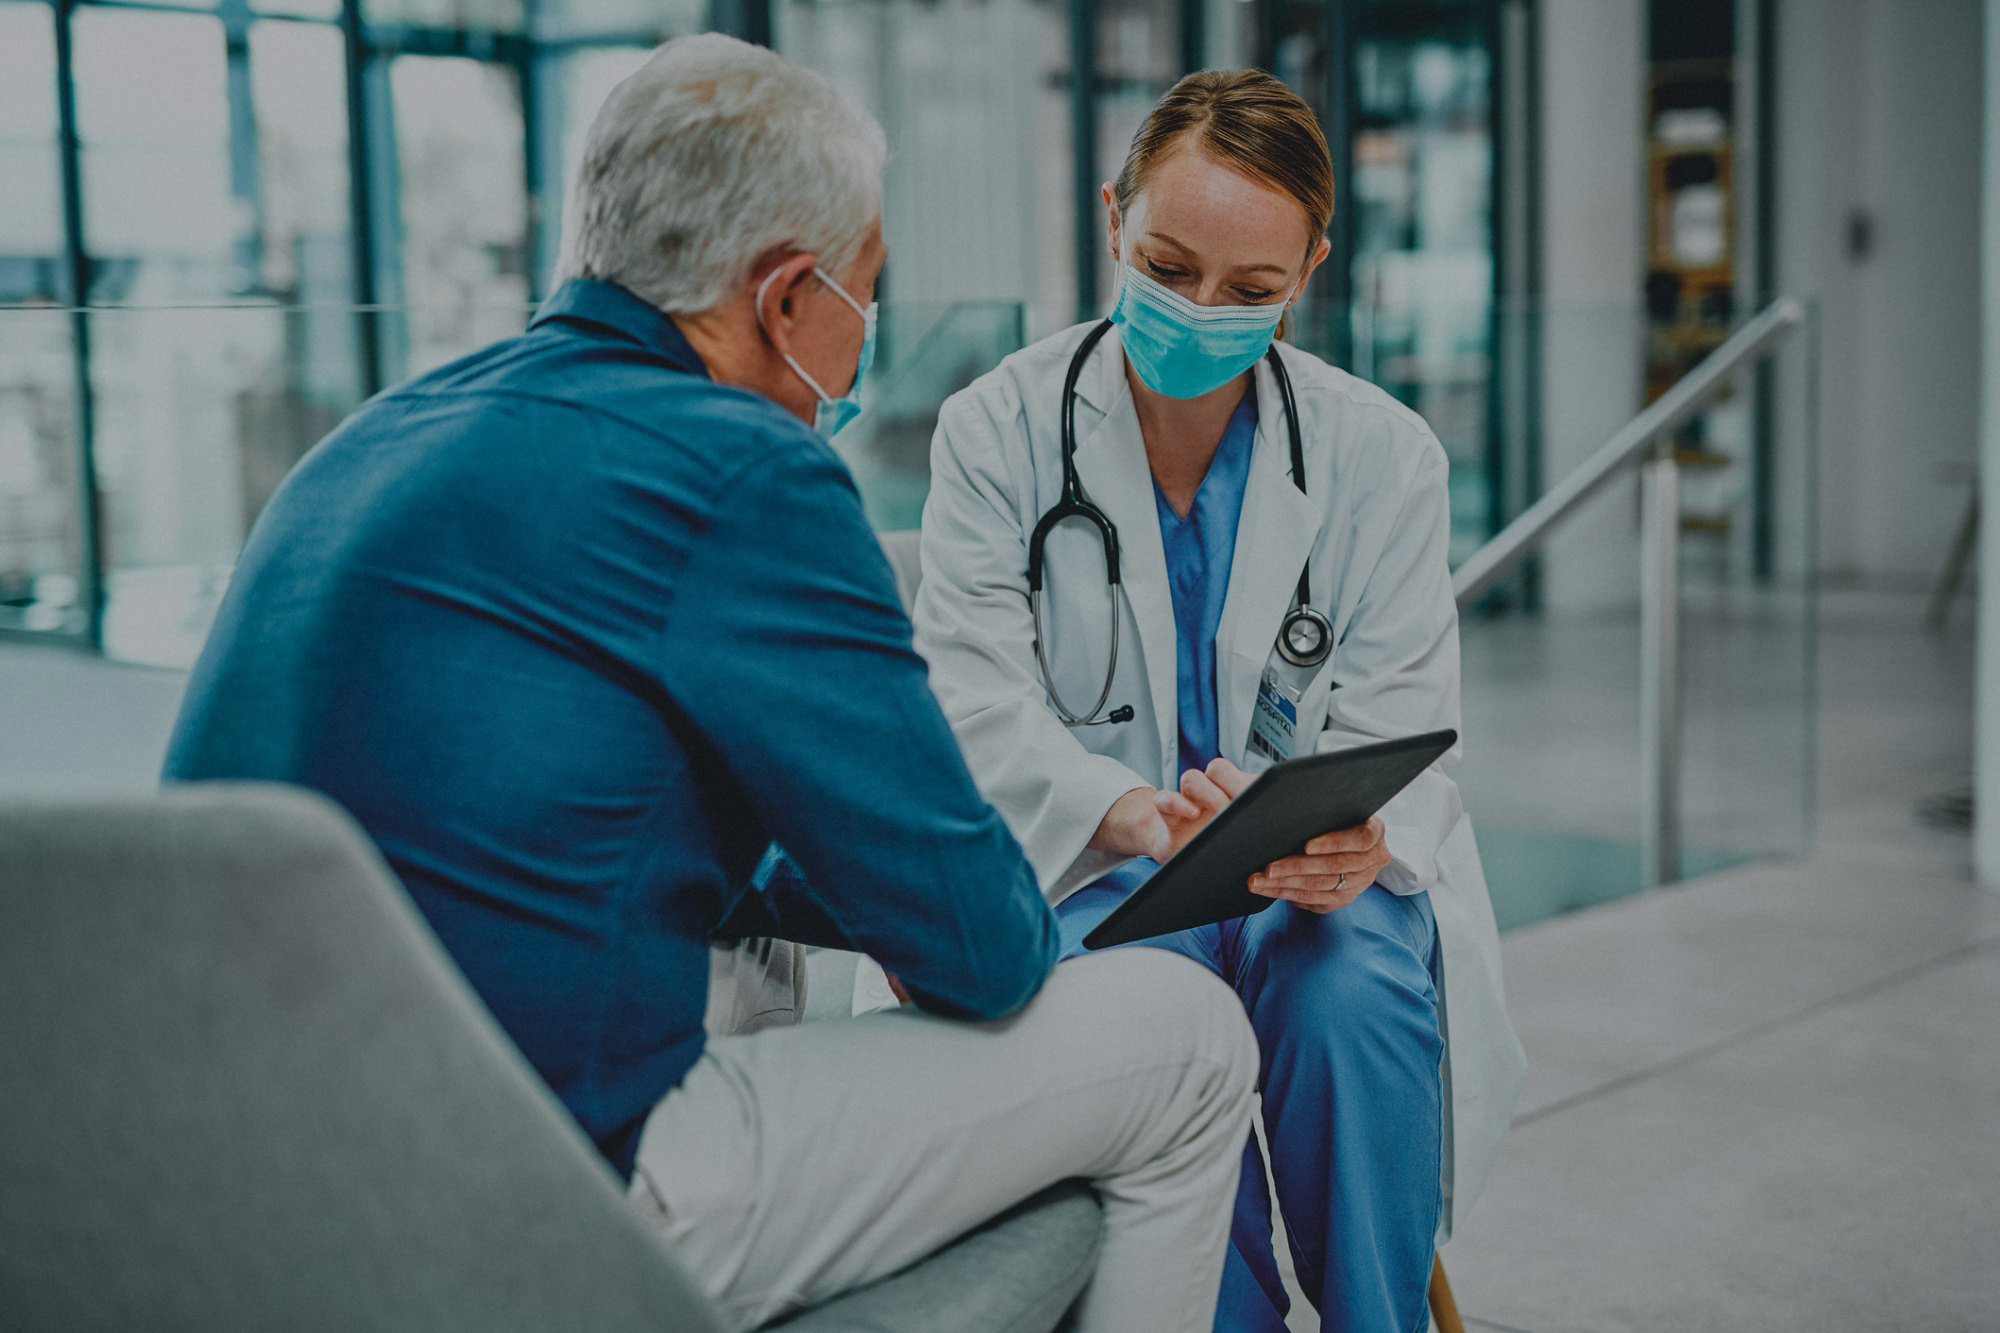 Physician talking with an older patient